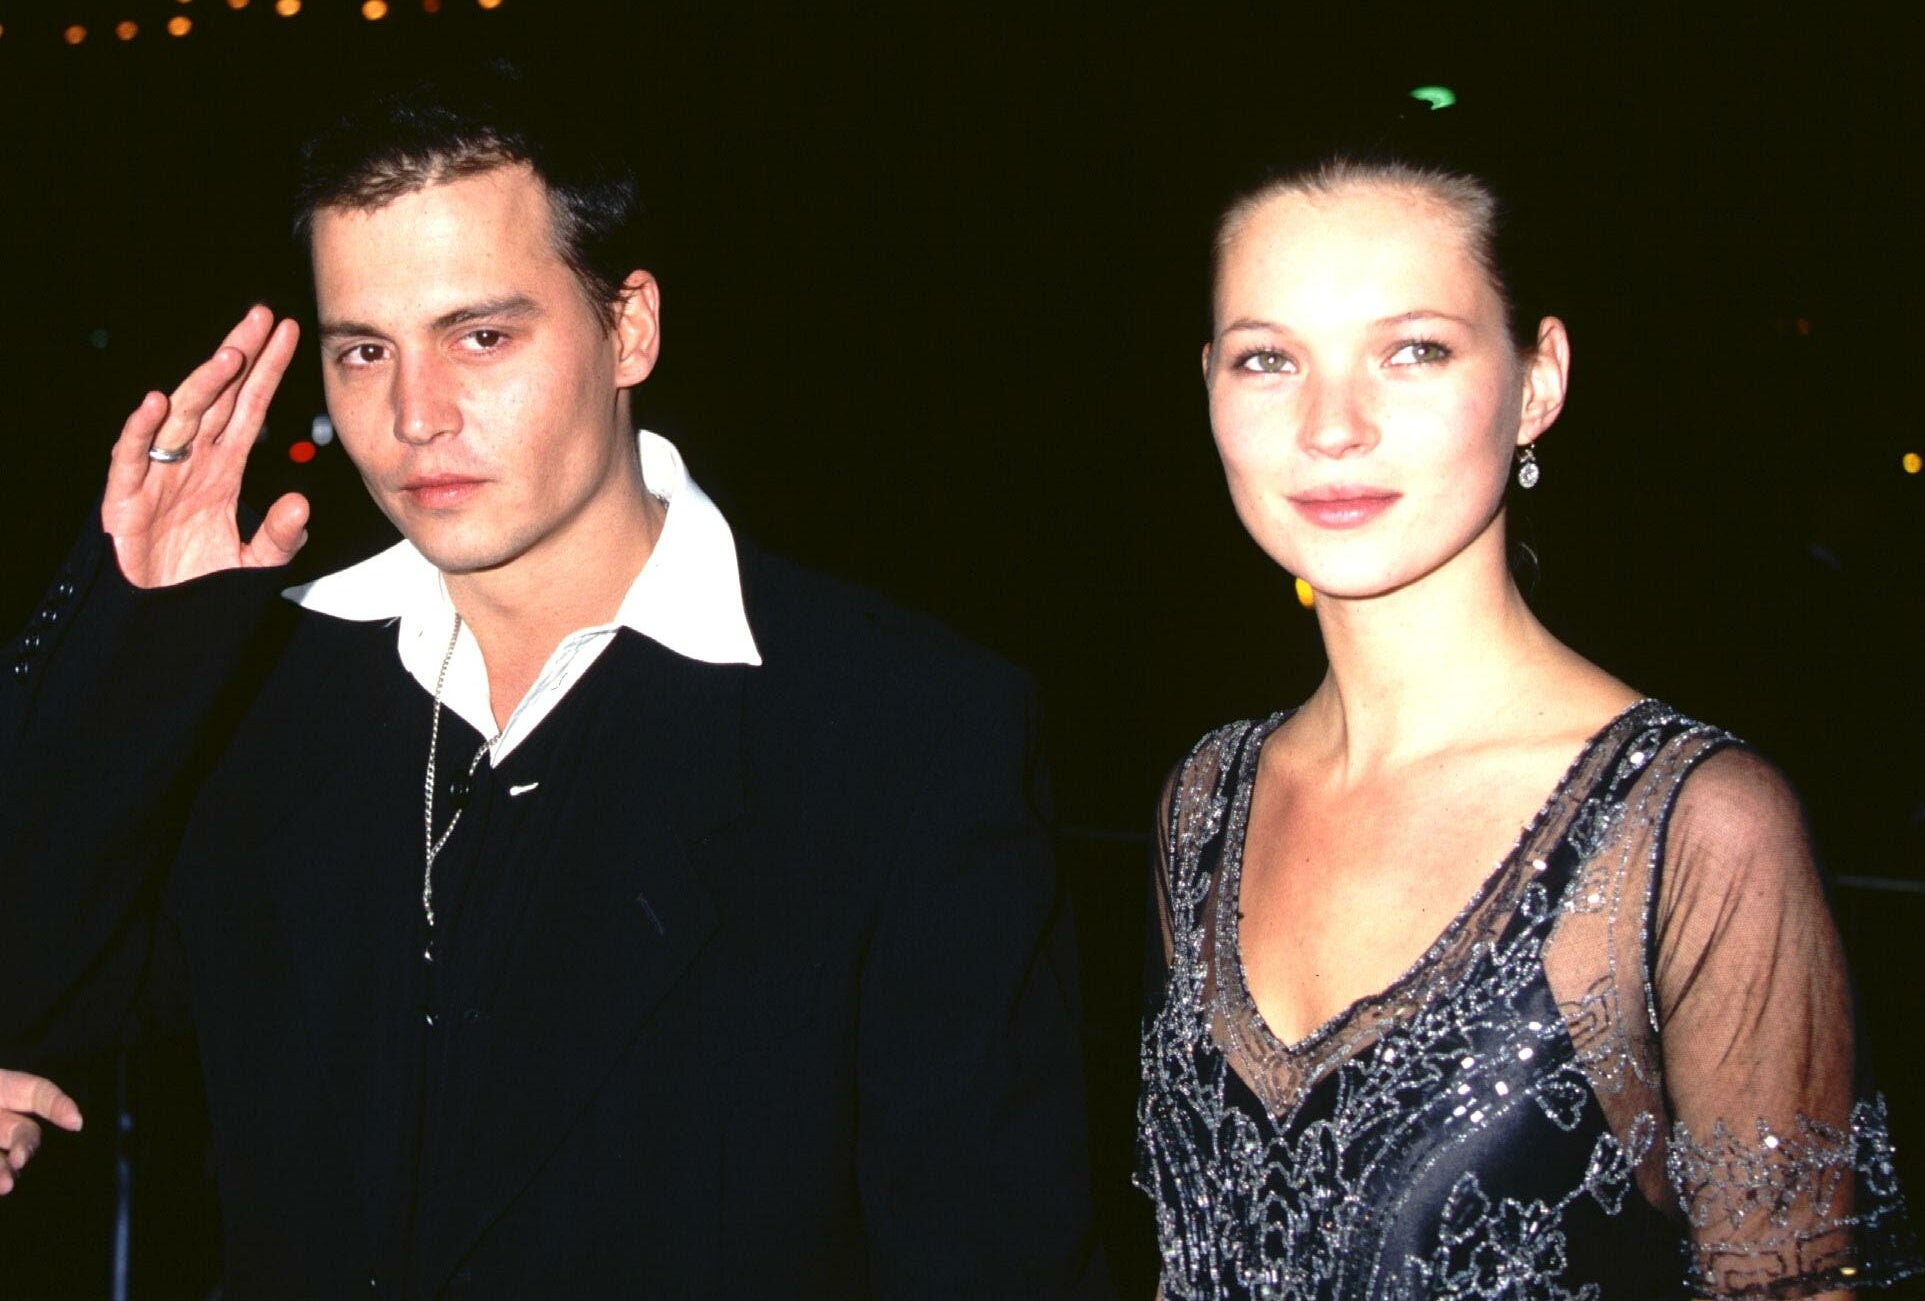 Croydon model Kate Moss was the epitome of Cool Britannia when dating Johnny Depp in 1997